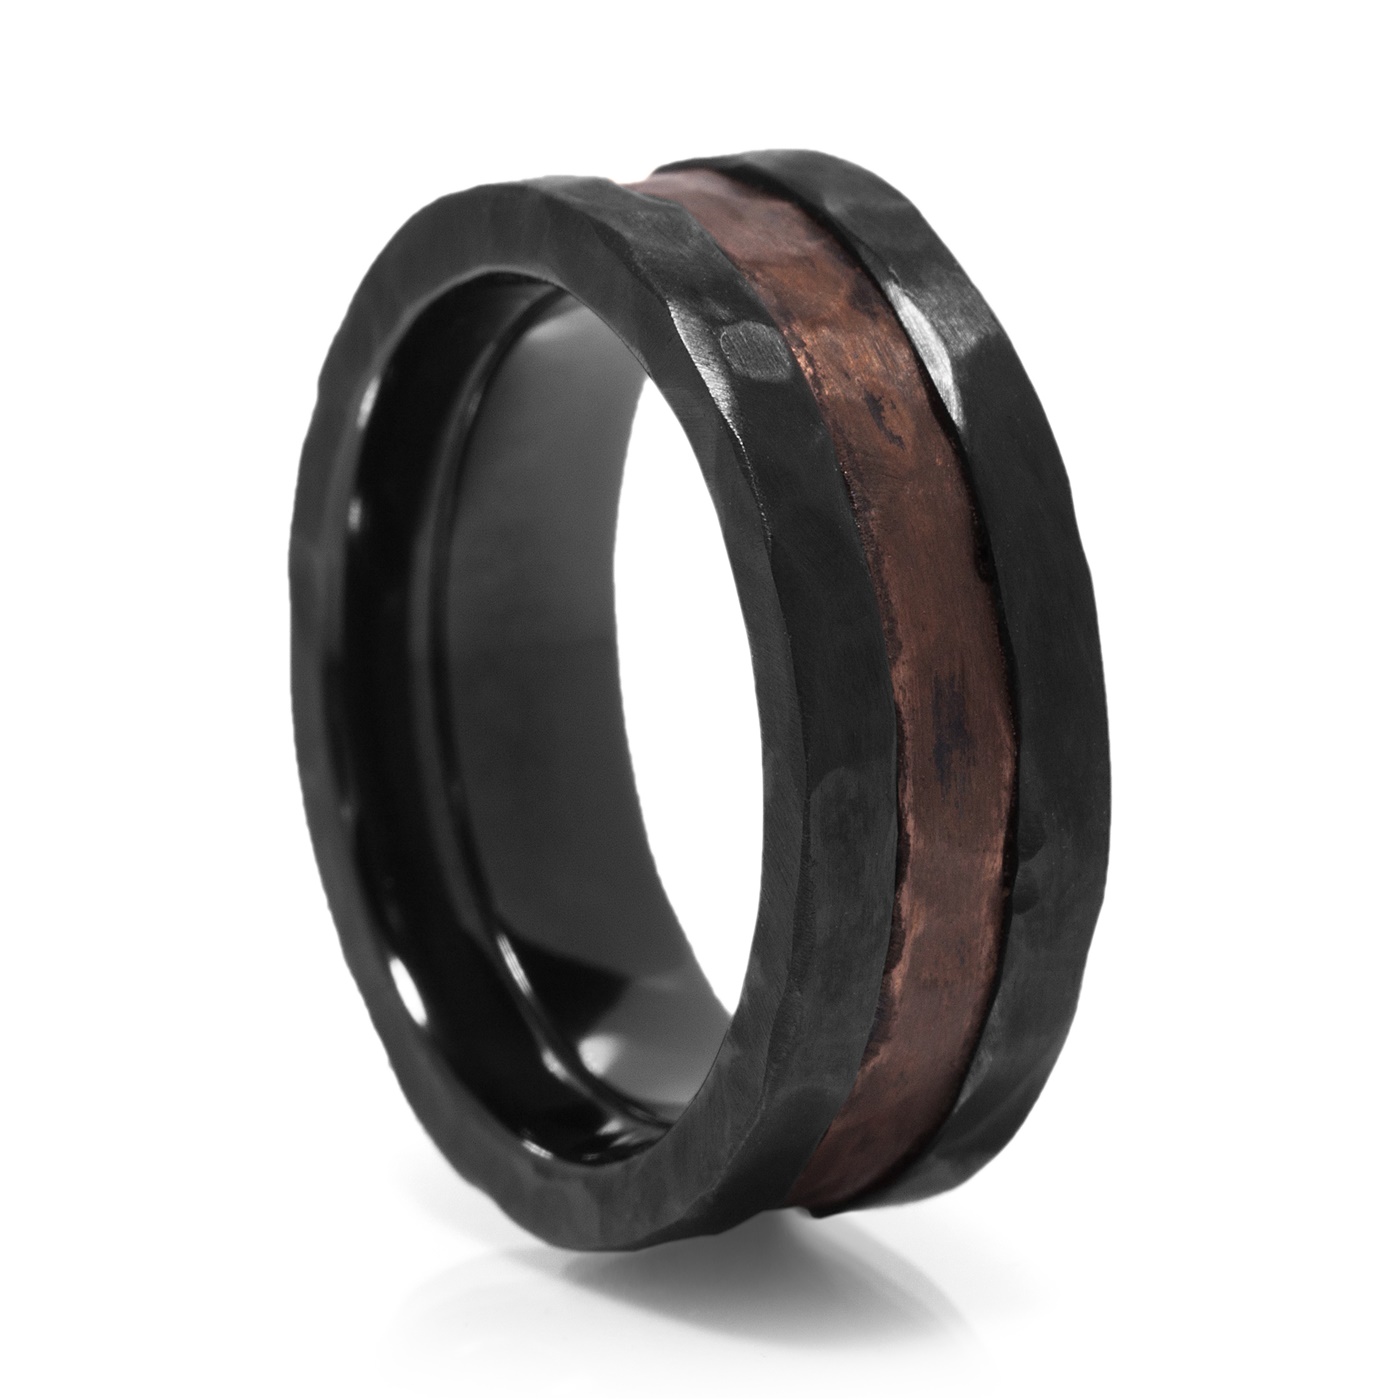 Black Zirconium Distressed Copper Hammered Ring by Lashbrook